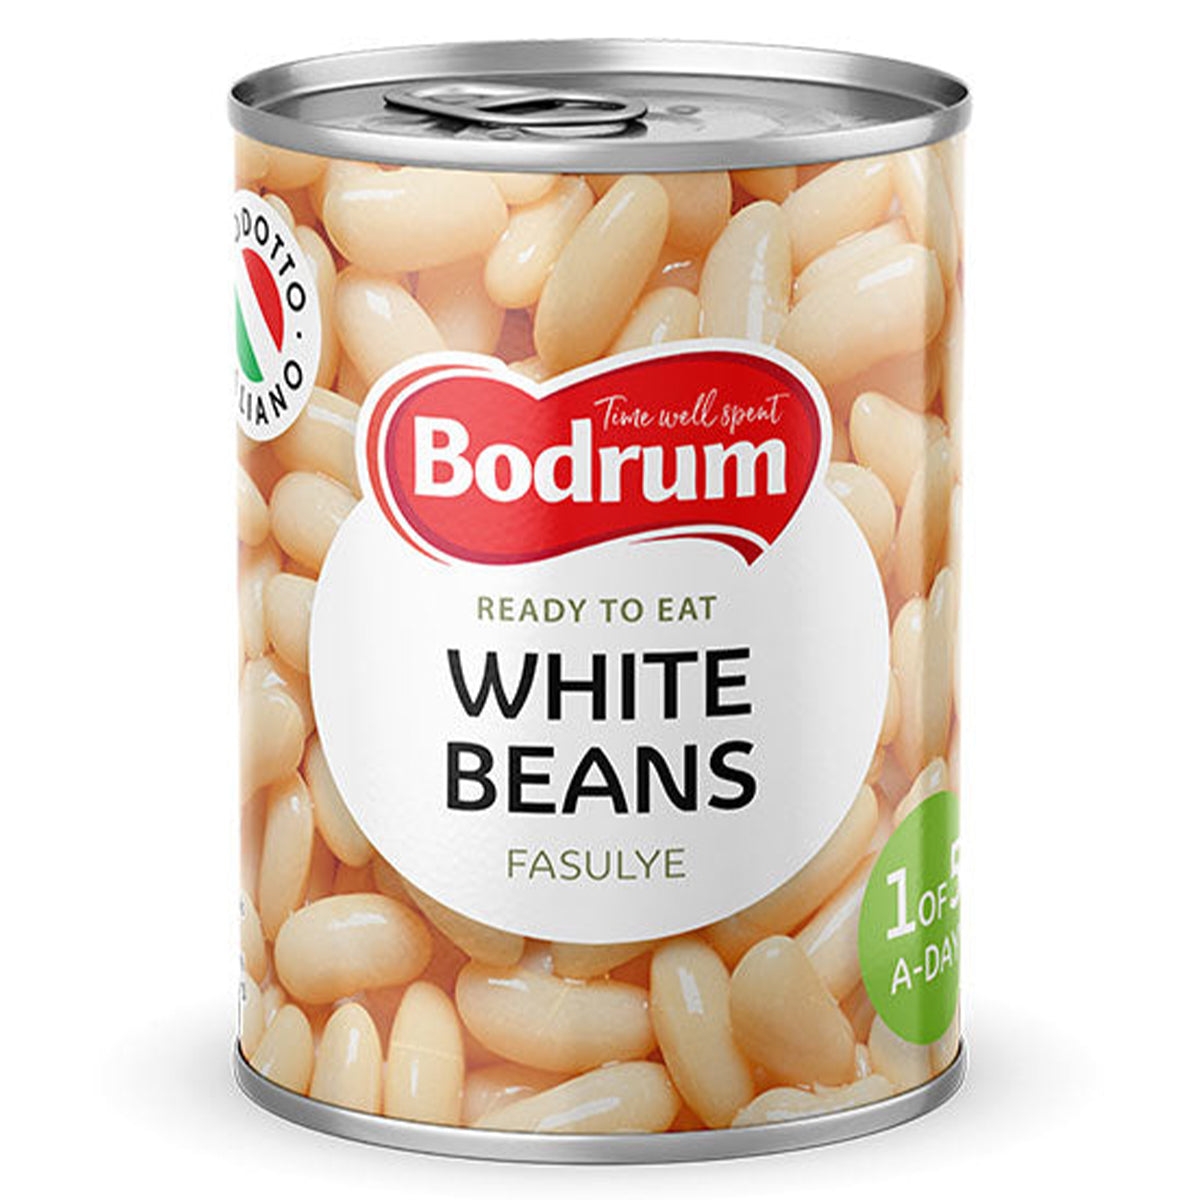 Bodrum ready to eat white beans - Bodrum - White Beans - 400g.